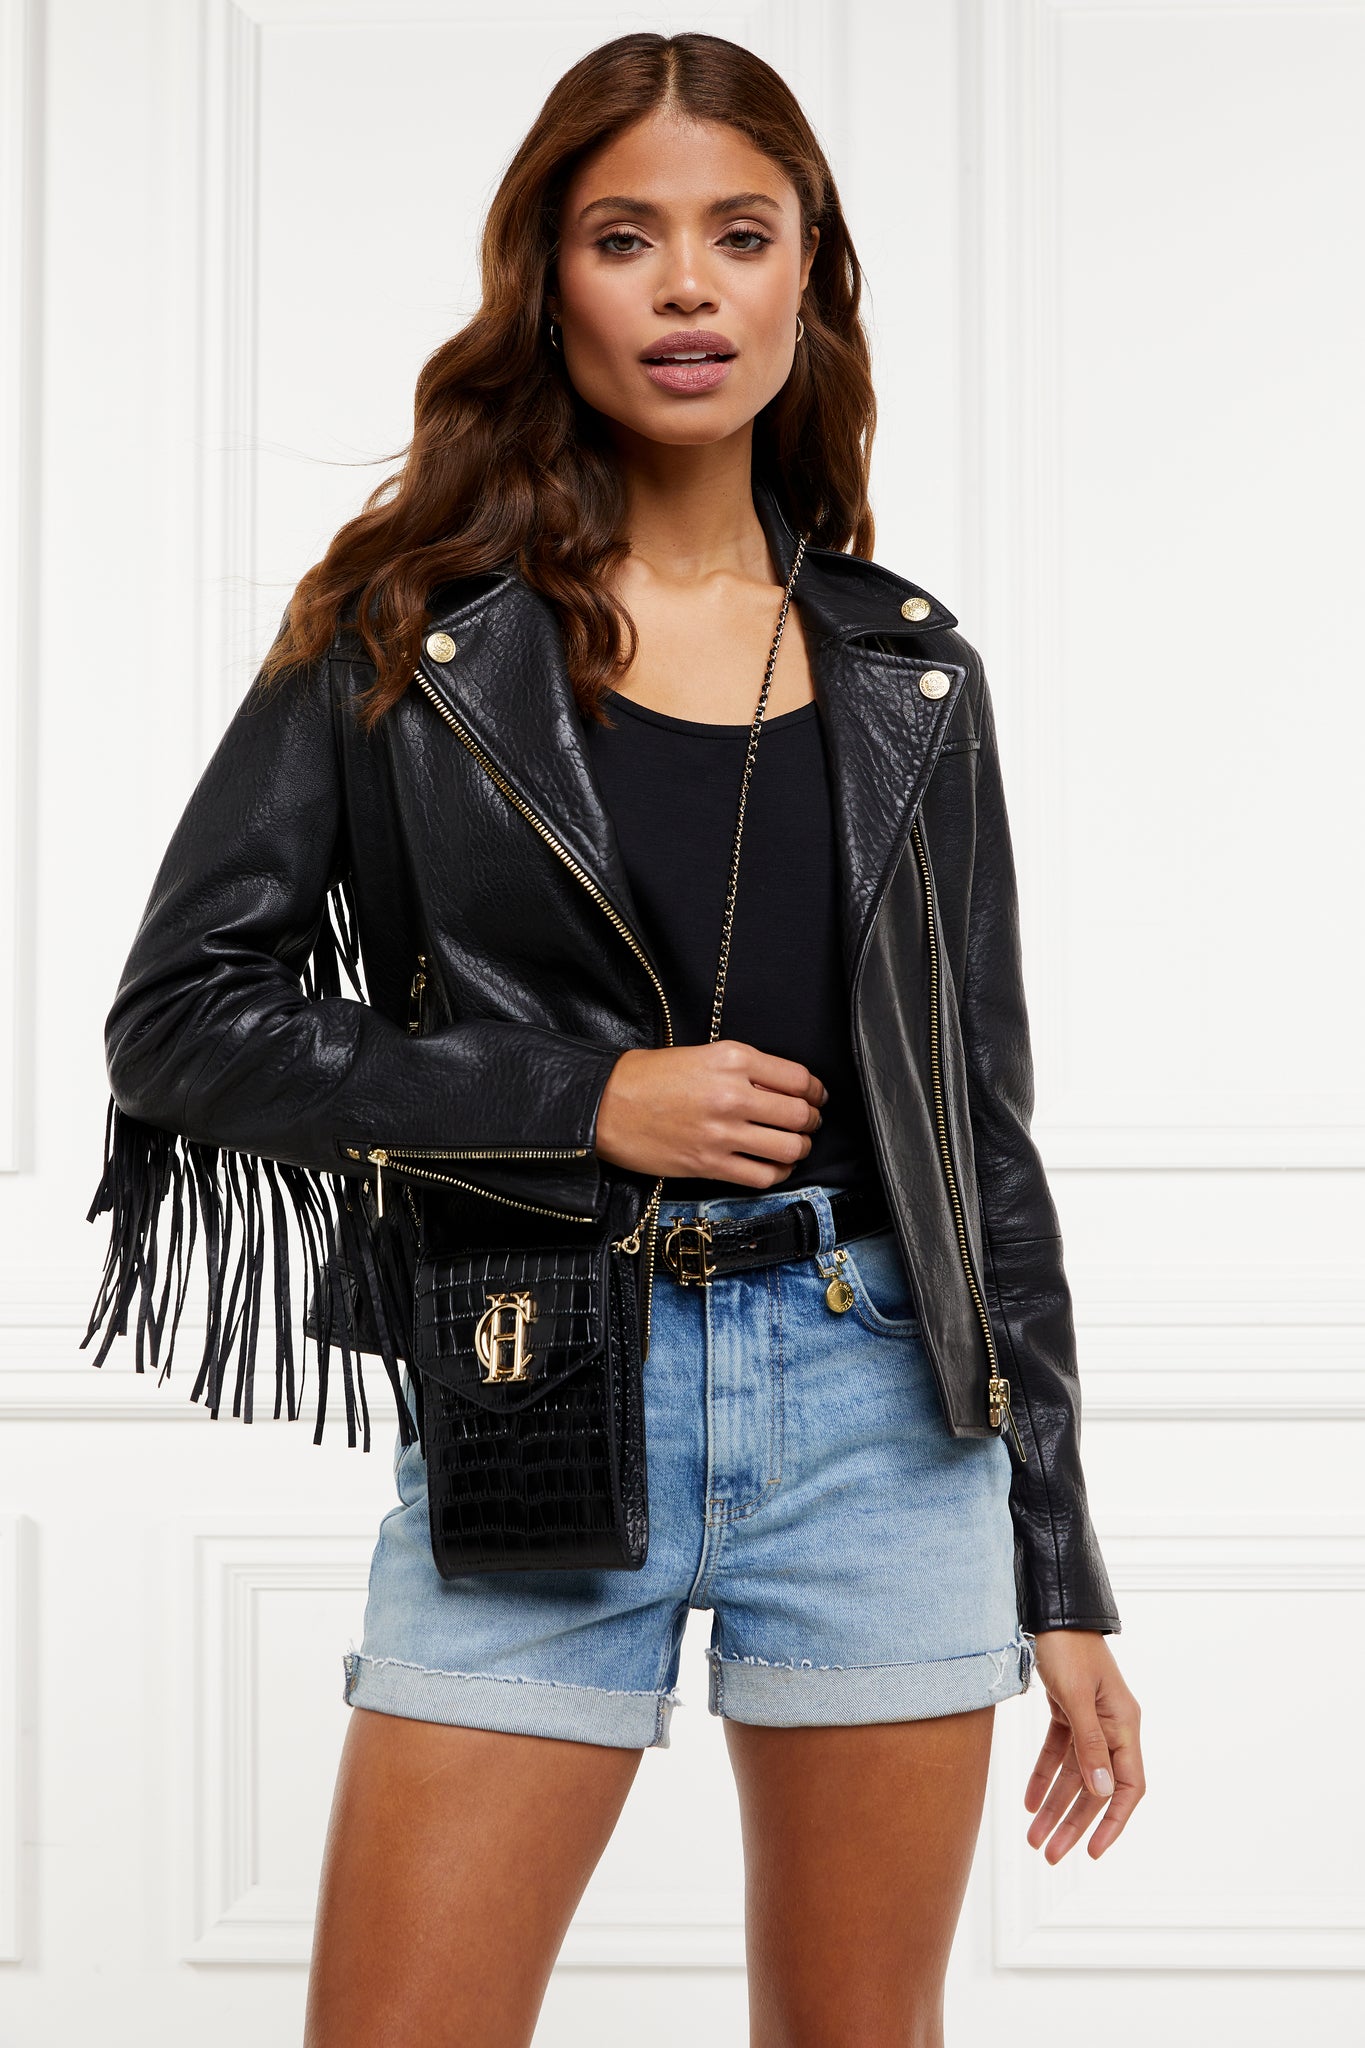 womens leather biker jacket in black with fringing along the back and sleeves detailed with golf zips and small shield badge on arm